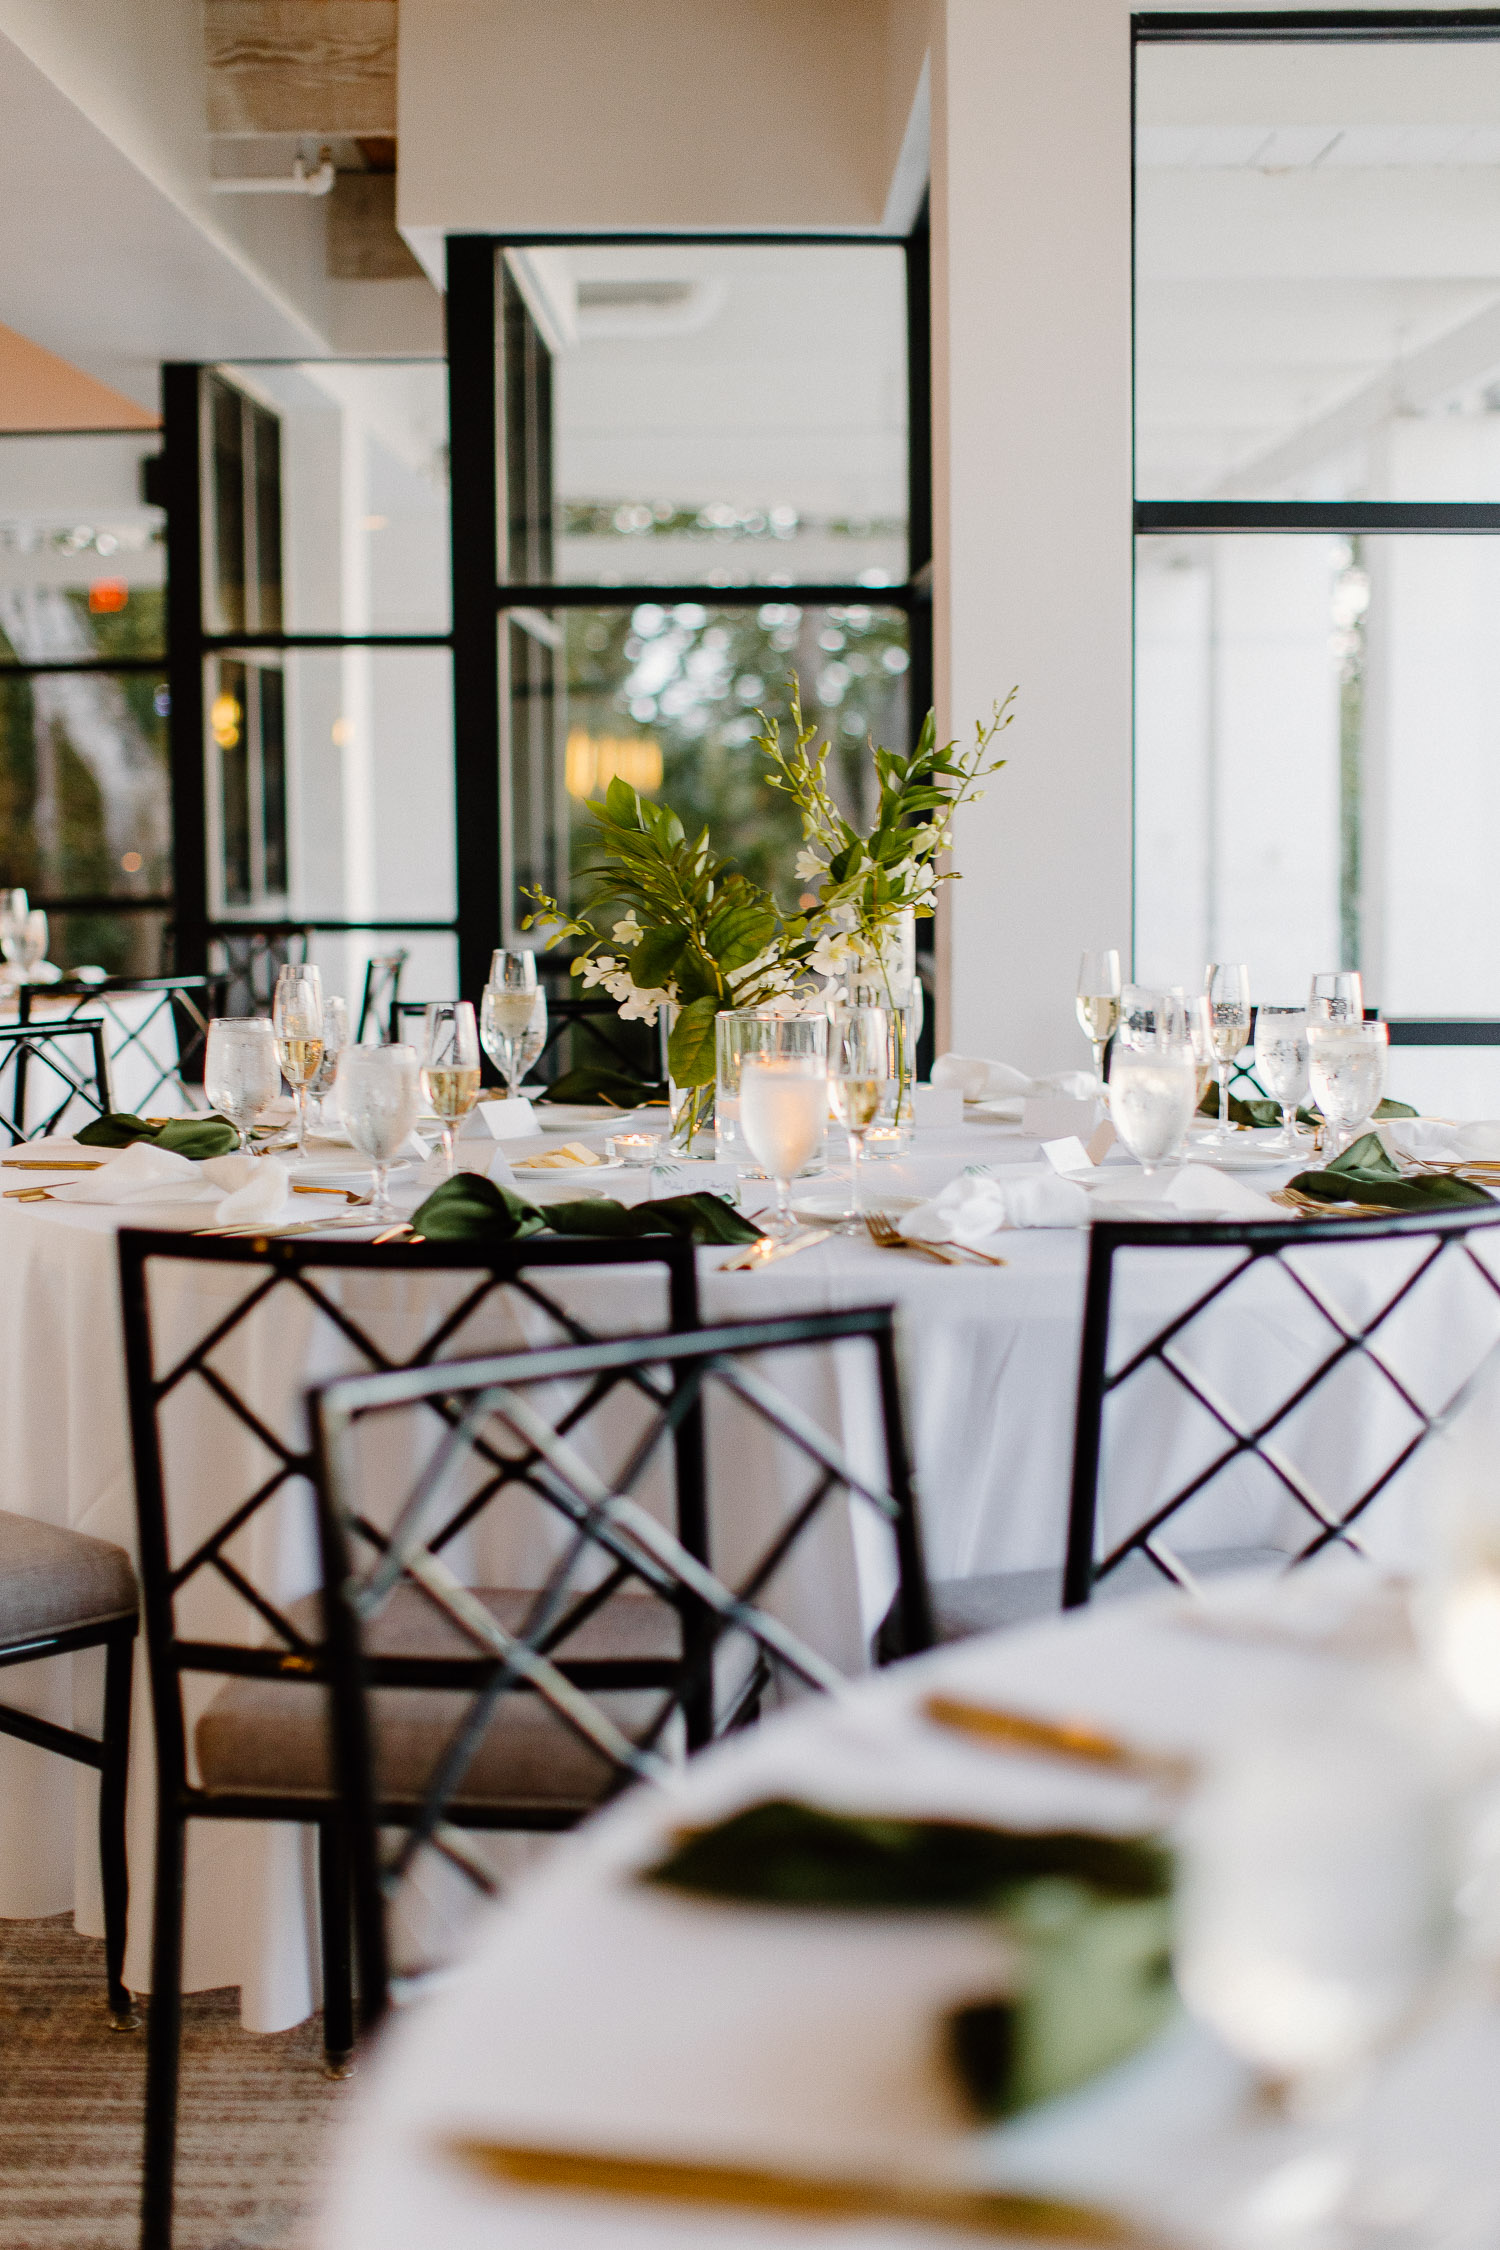 wedding decor wit greenery and white linens 